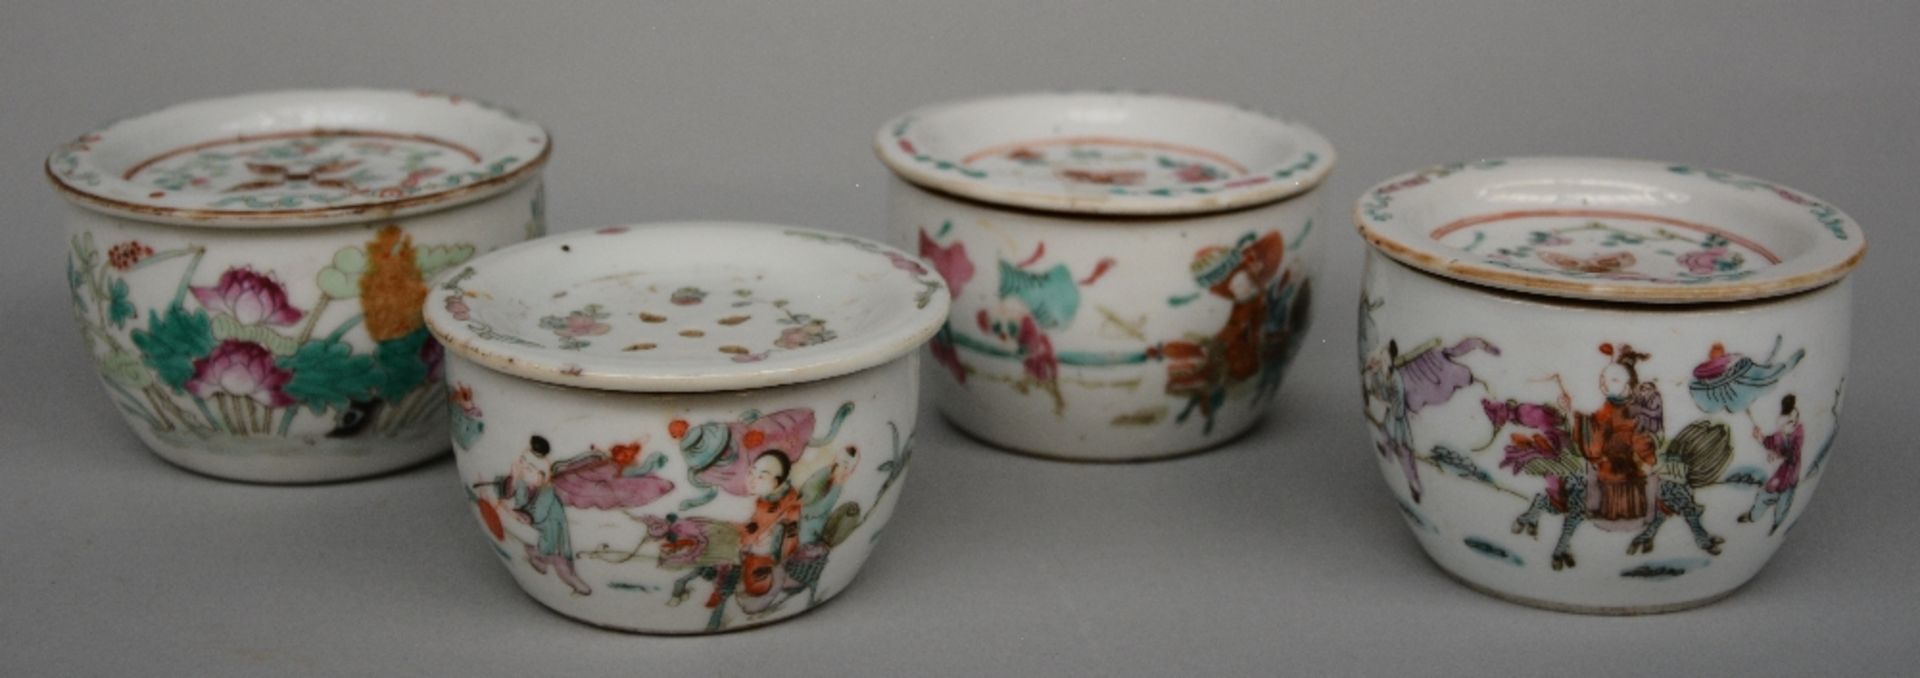 Various Chinese polychrome decorated bowls with cover, plates and brush pots, ca. 1900, H 4,5 > 12 - Bild 4 aus 7